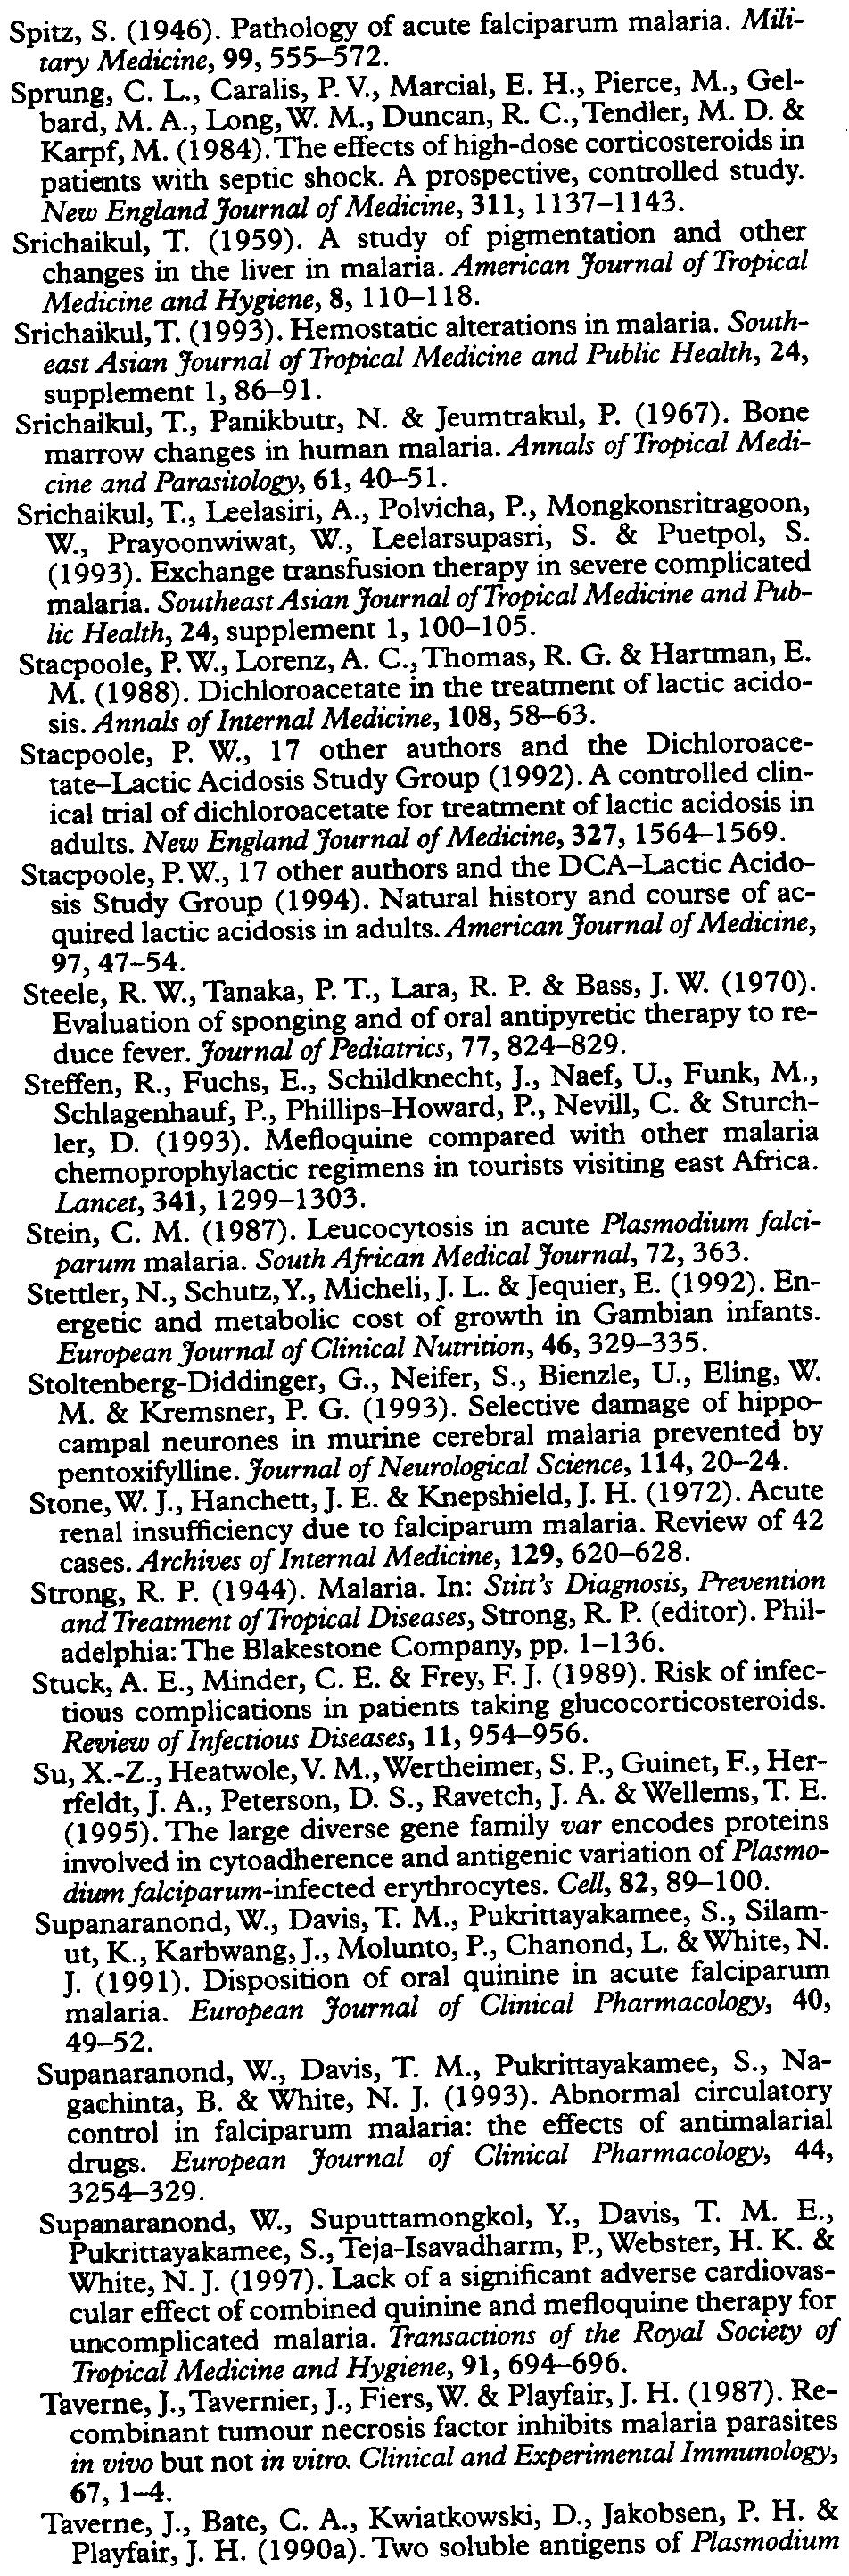 A prospective, controlled study. New EnglandJournal of Medicine, 311,1137-1143. Srichaikul, T. (1959). A study of pigmentation and other changes in the liver in malaria.